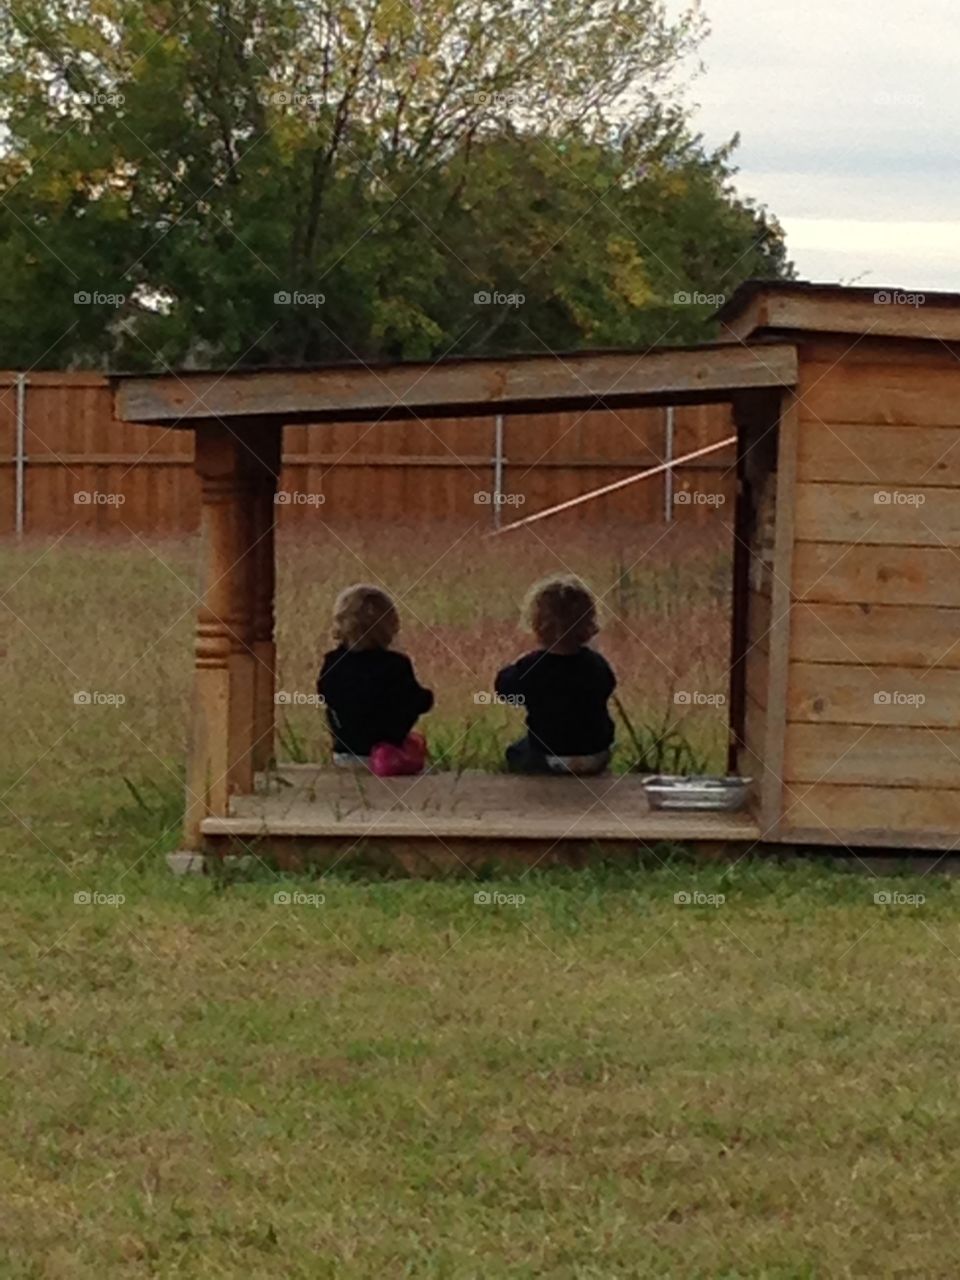 Twins spending time together . Siblings outdoors